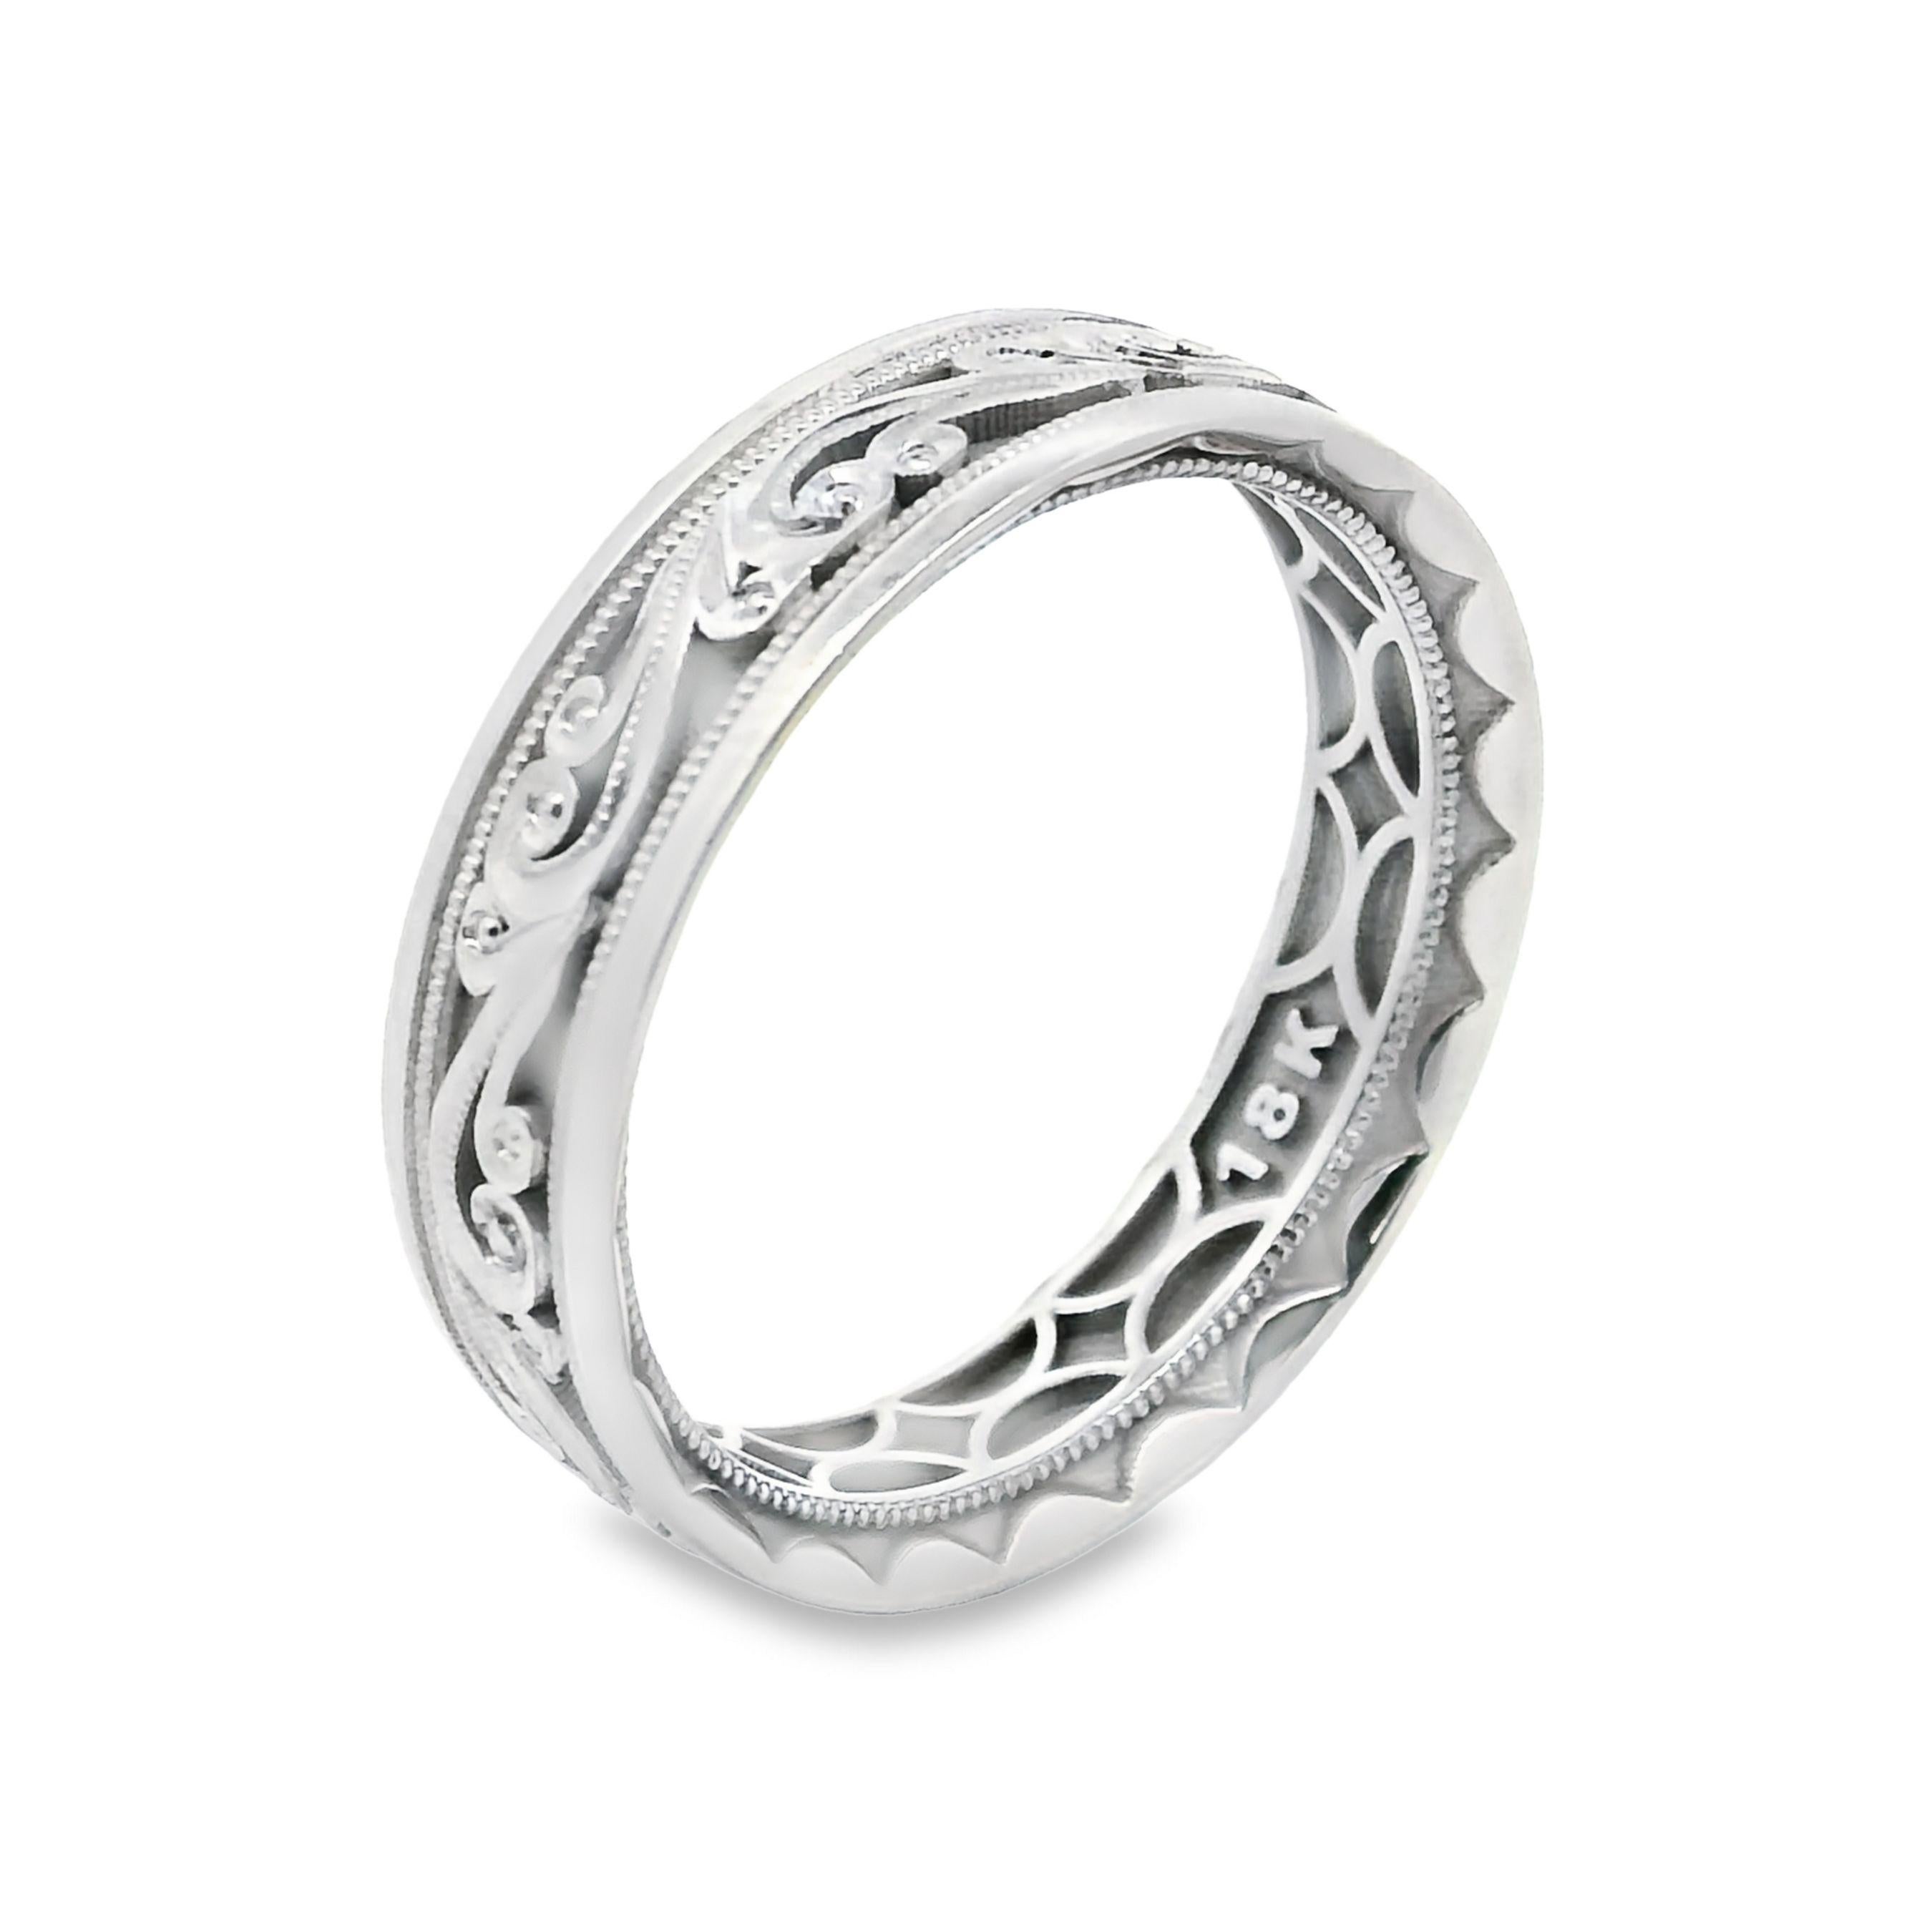 Tacori 104-6W men's wedding band in 18K white gold and 6 millimeters in width.  This ring has a brushed finish, overlayed with filigrees along the center of the ring, bordered by a beaded design.  At the outer most edge is a high polish finish,